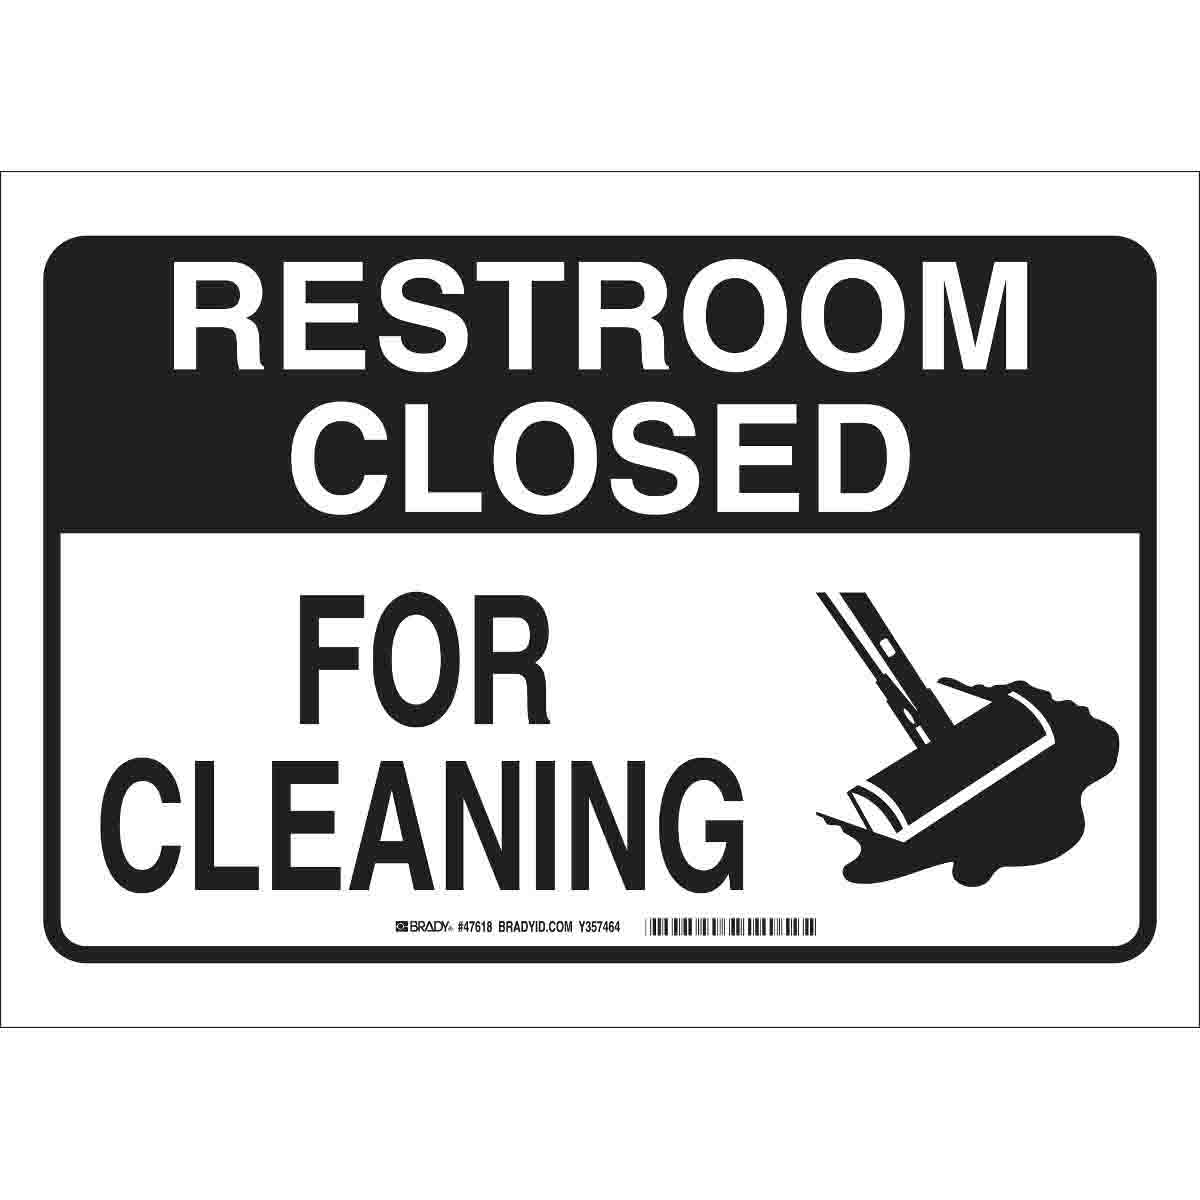 Closed For Cleaning Sign Printable - Printable Templates